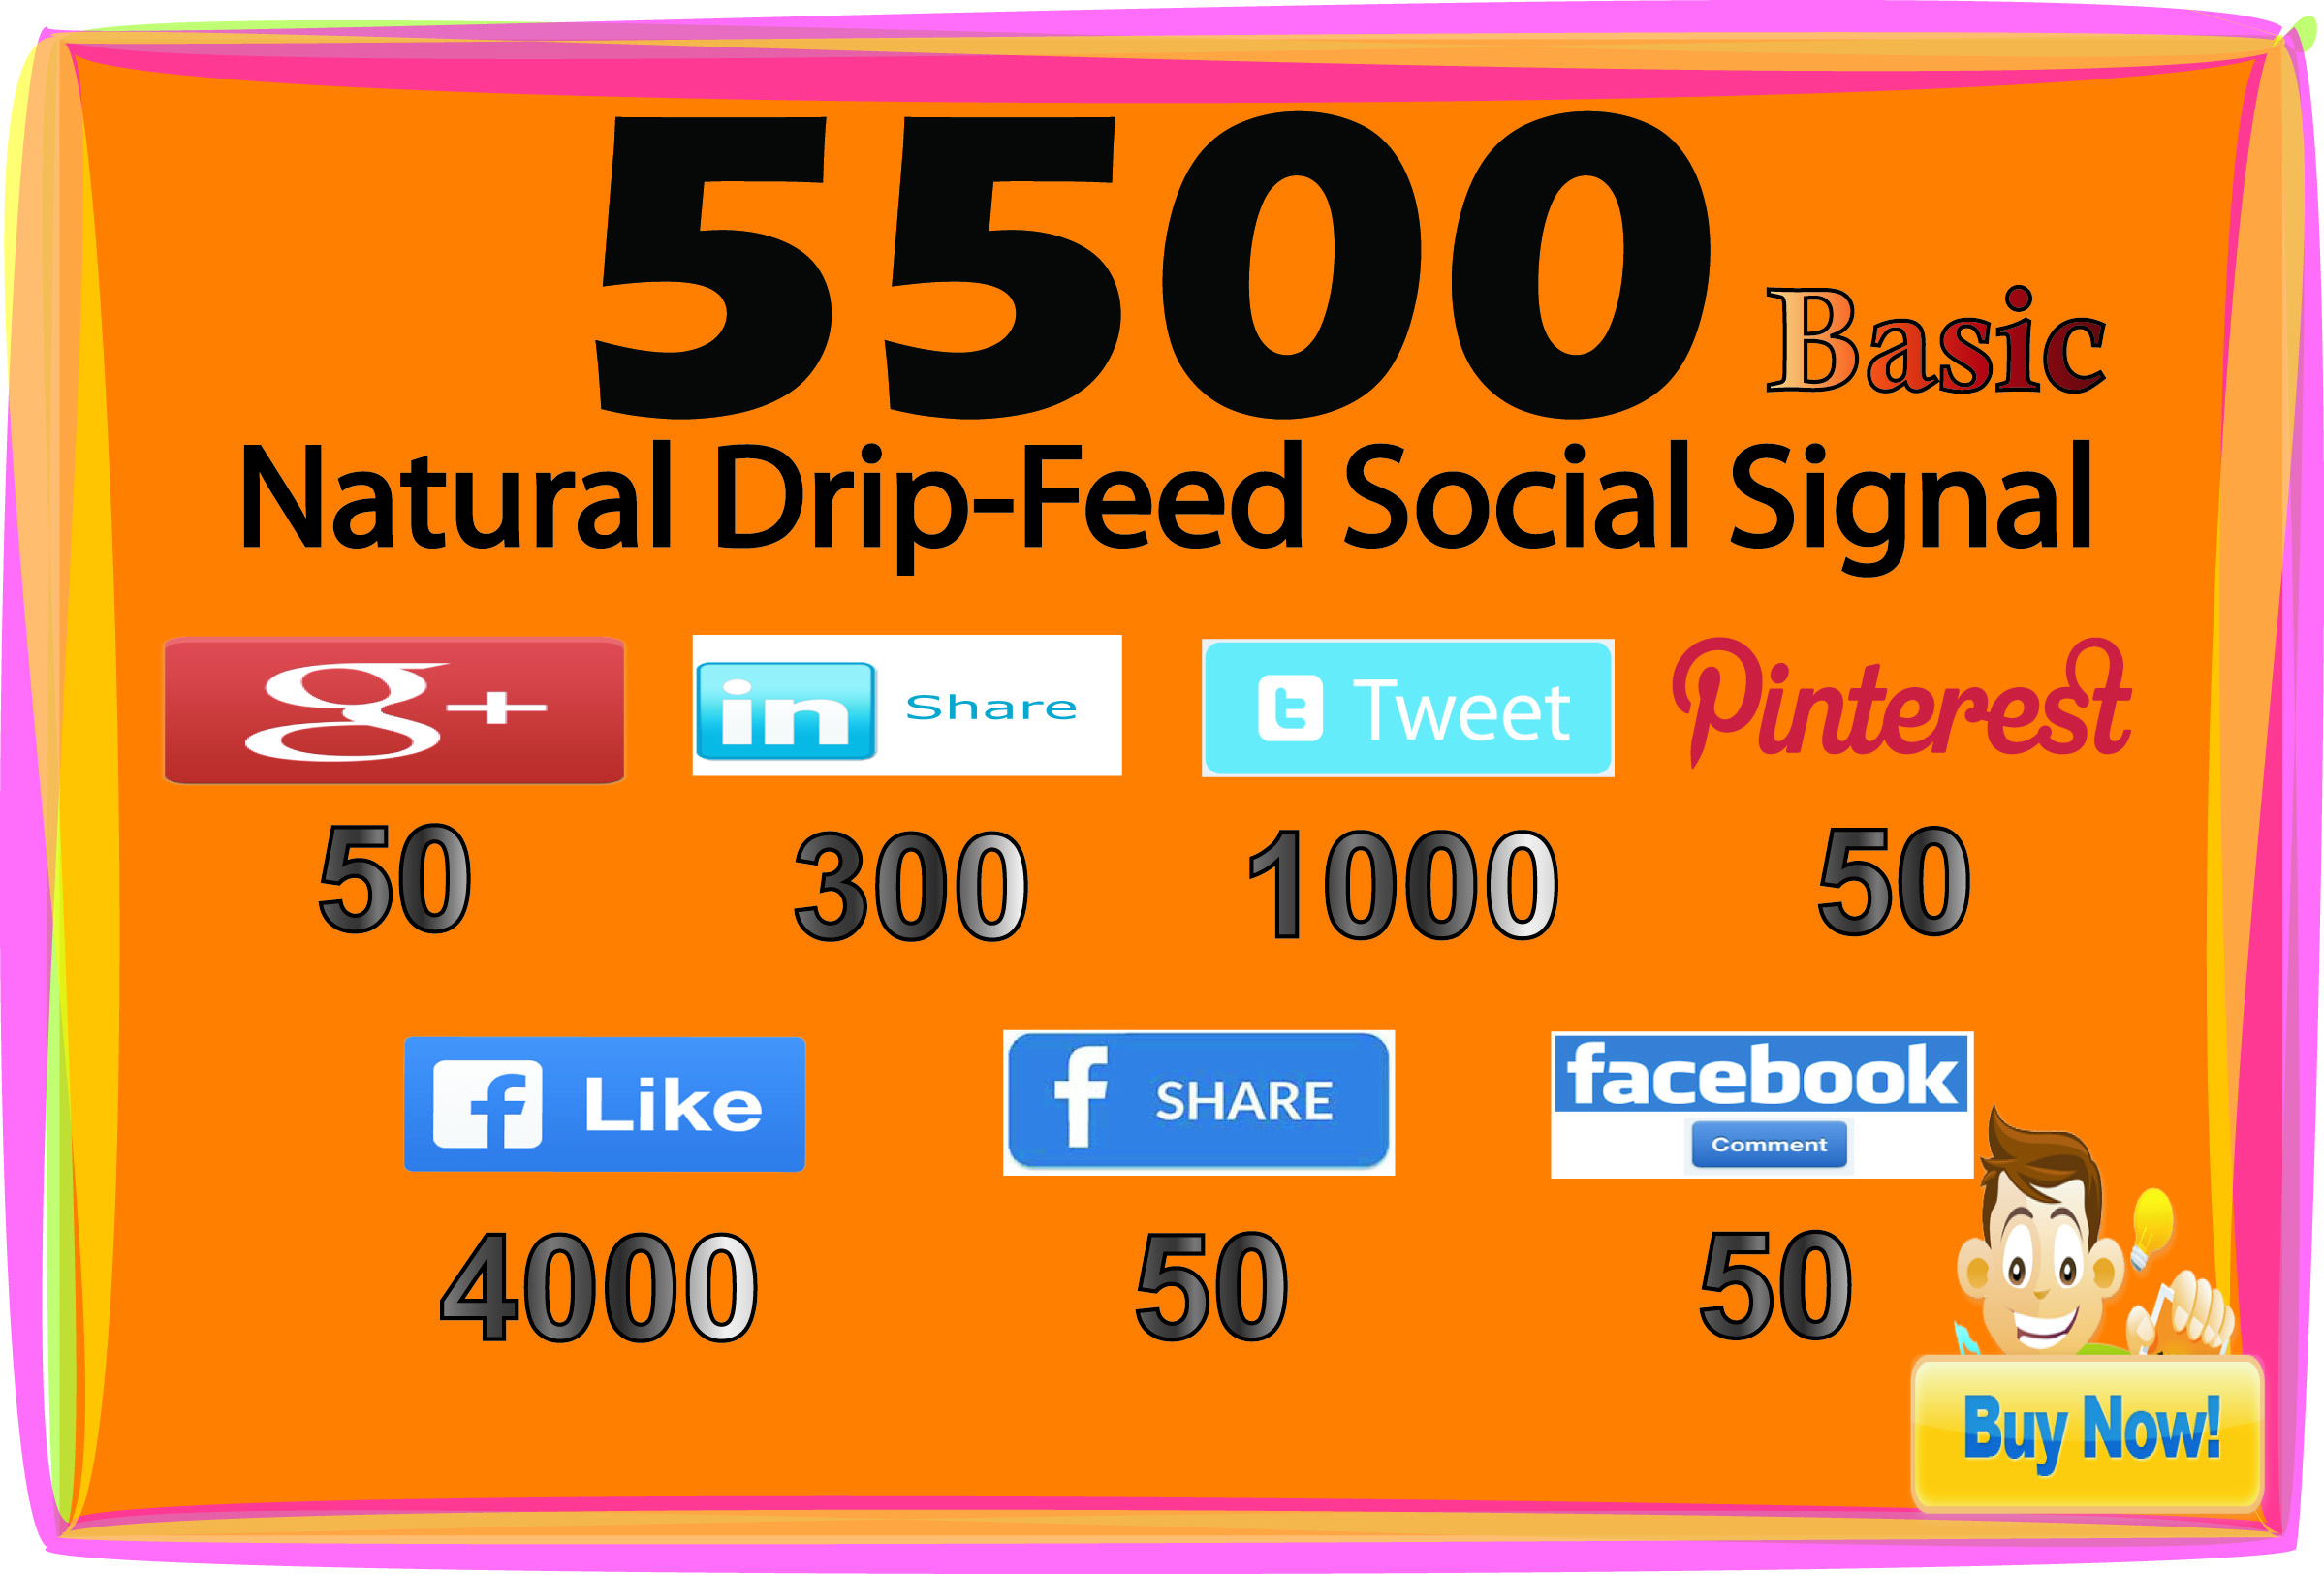 5500 Seo Drip Feed Social Signal From Pr 9and Pr 10 Sites For 5 Seoclerks